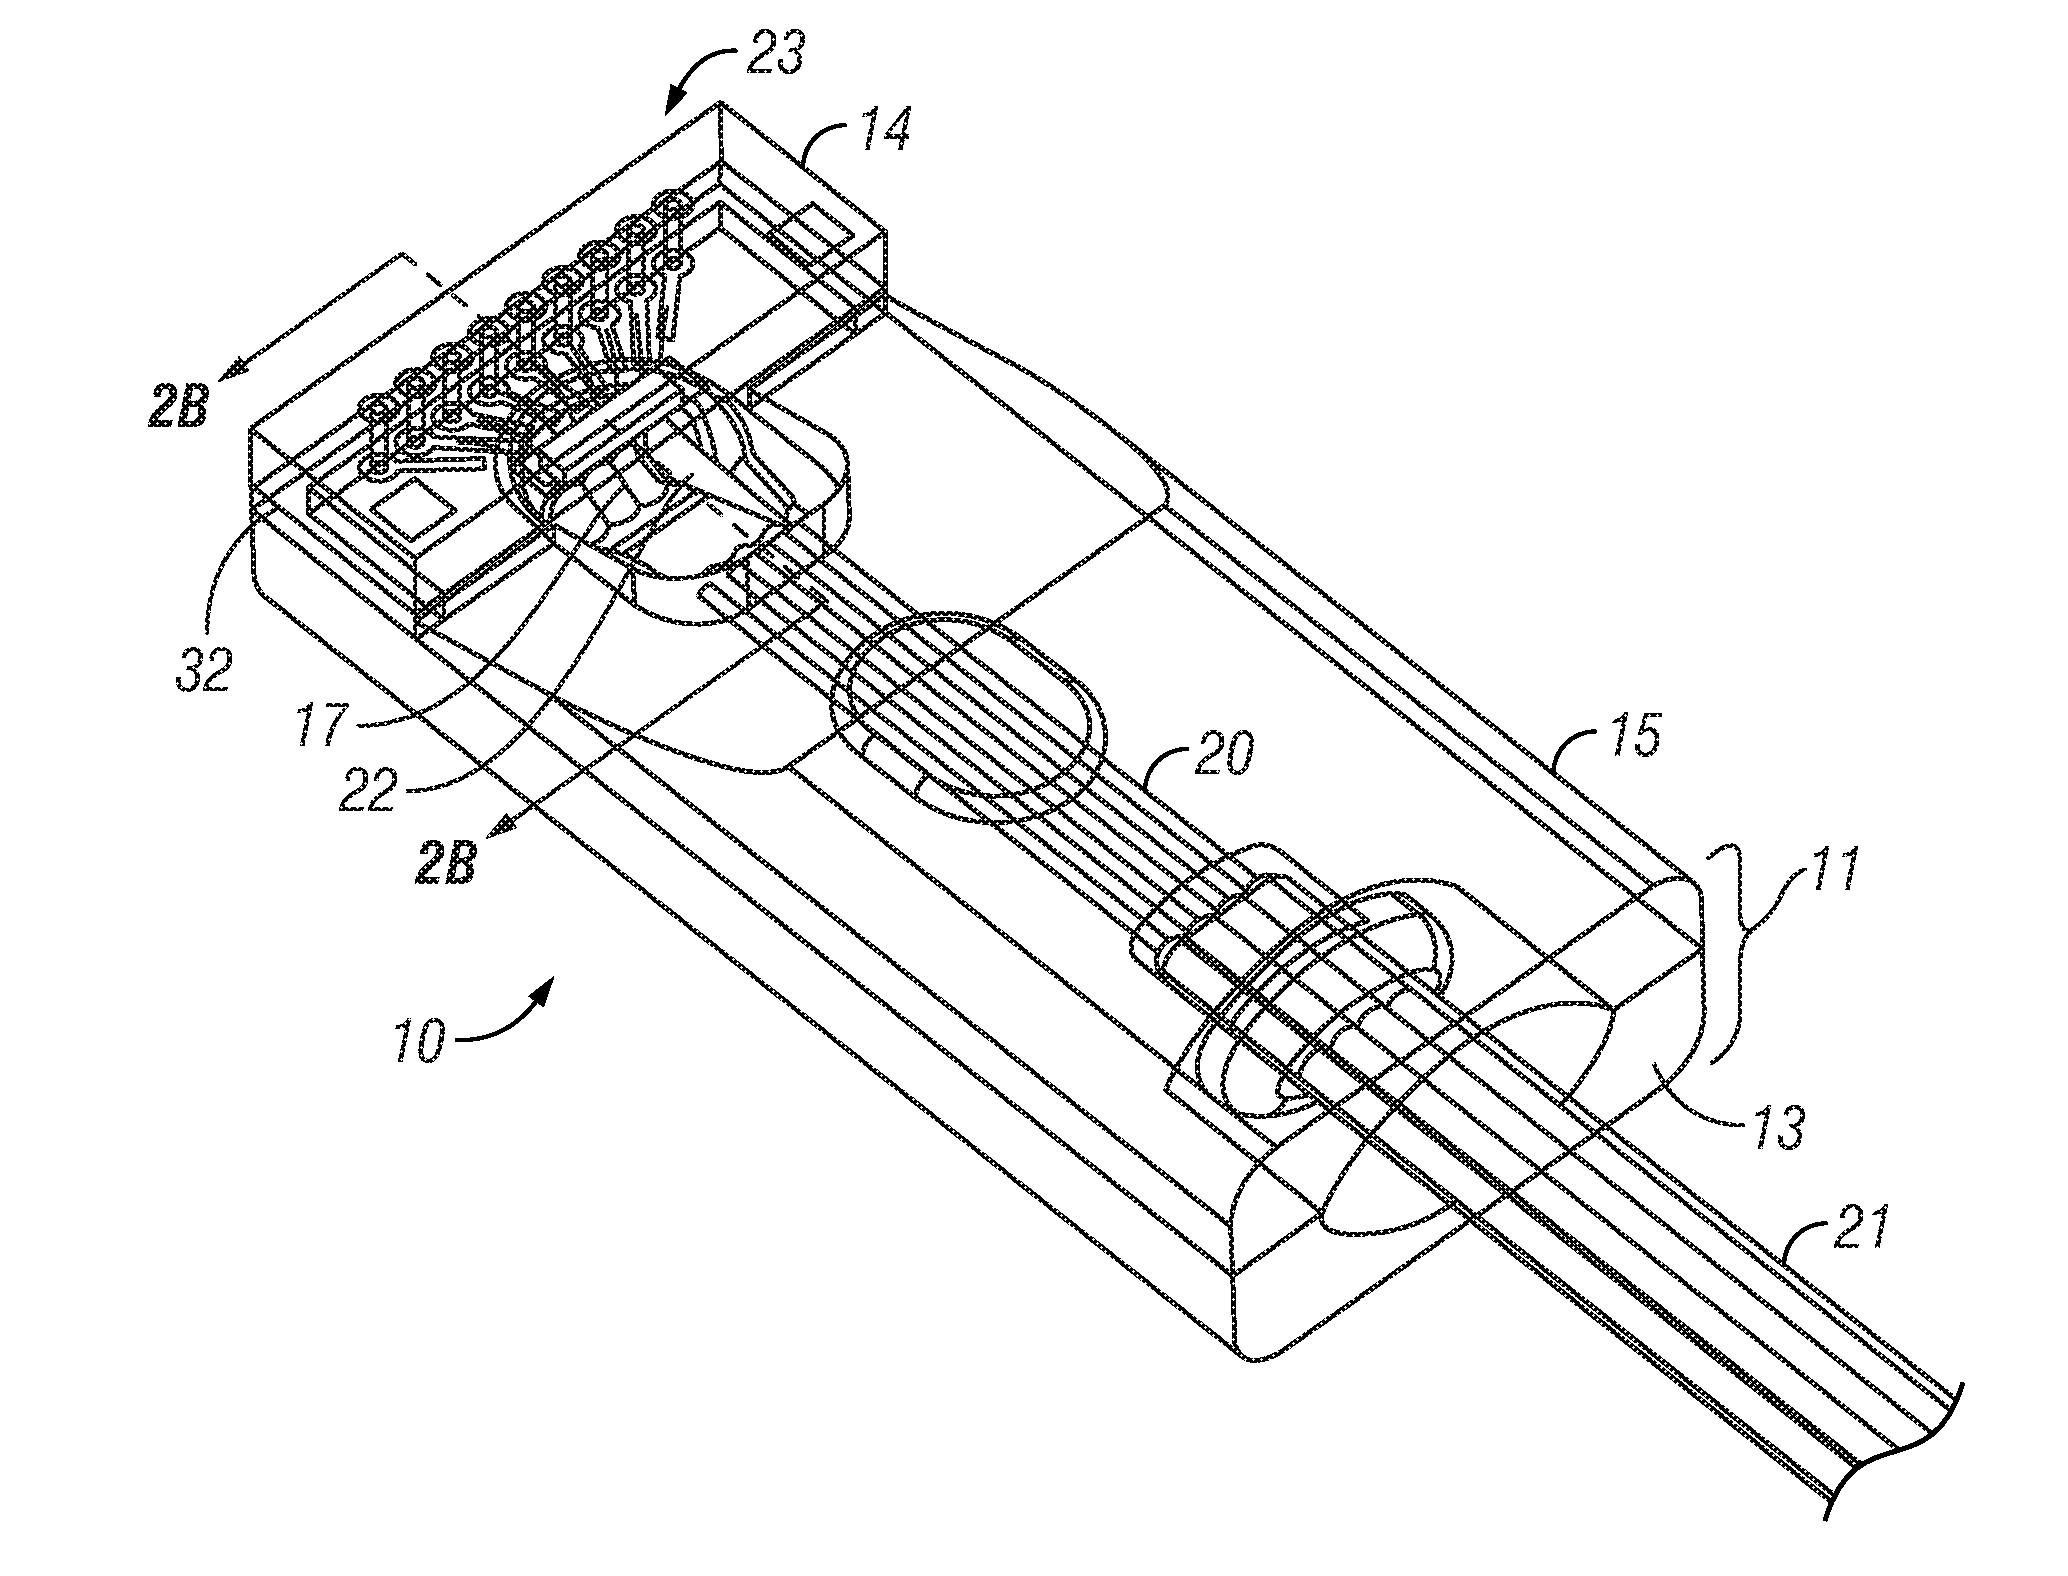 Optical bench subassembly having integrated photonic device